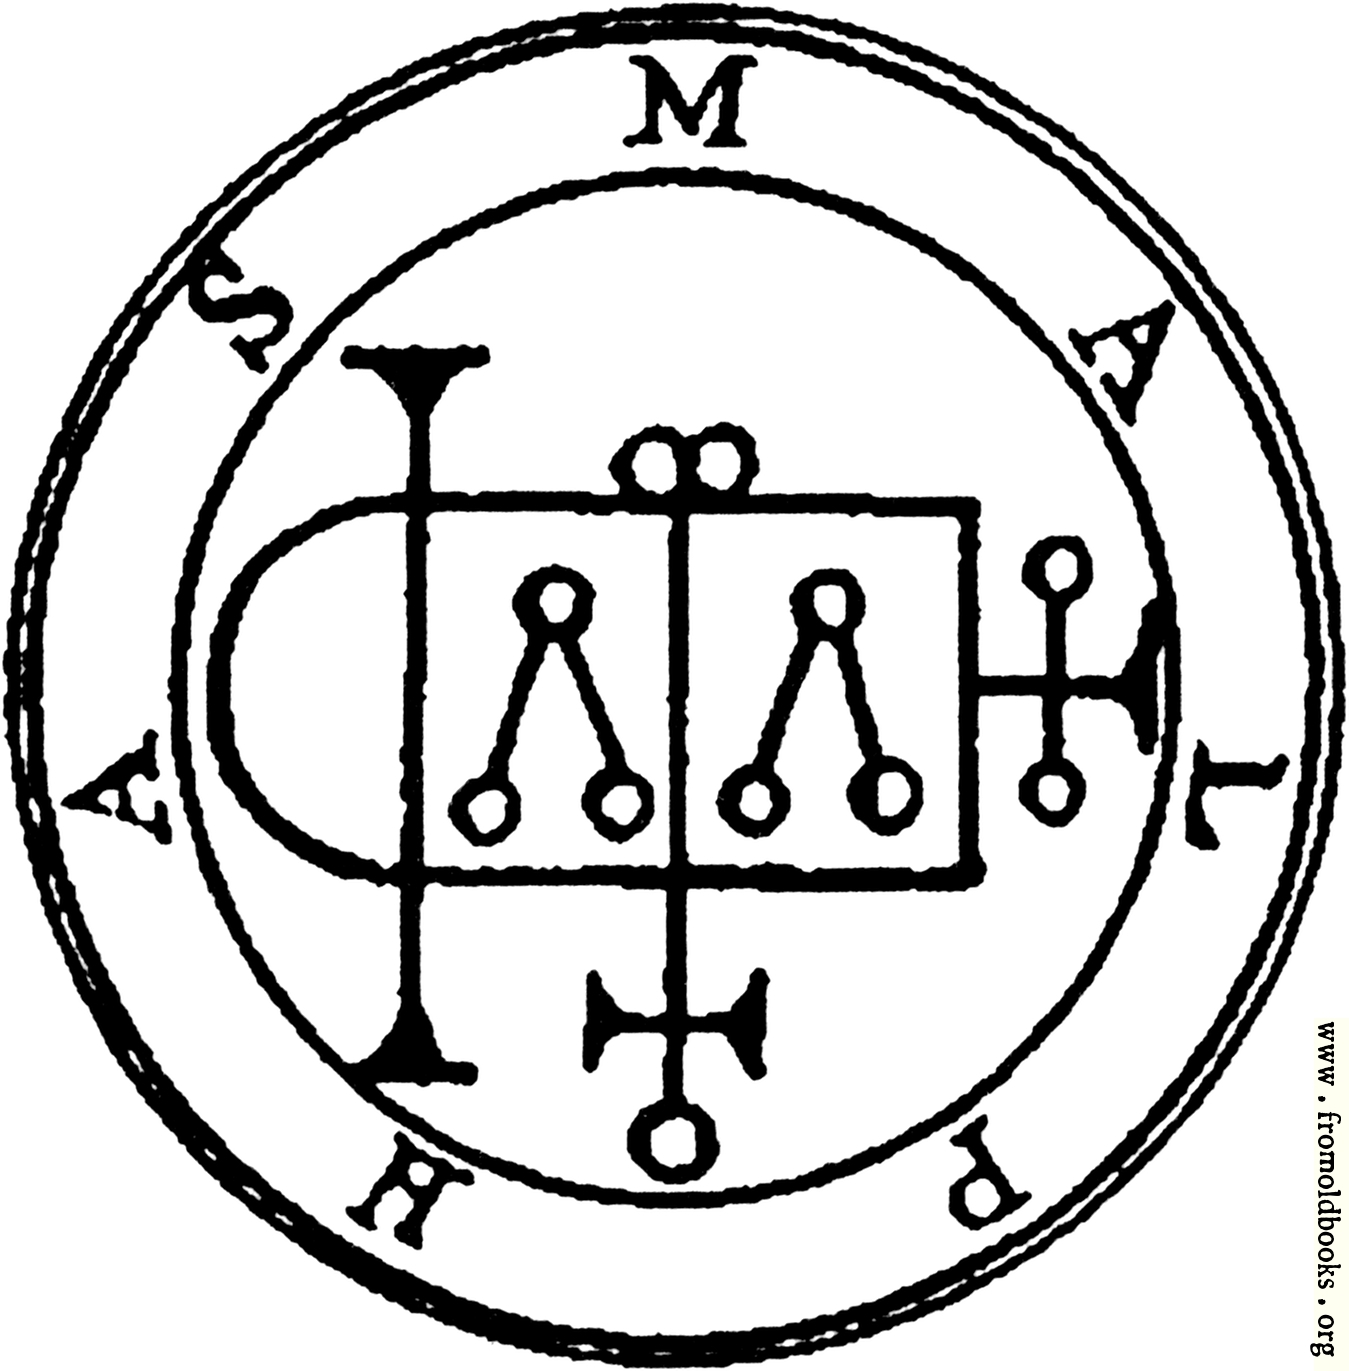 [Picture: 39. Seal of Malphas.]